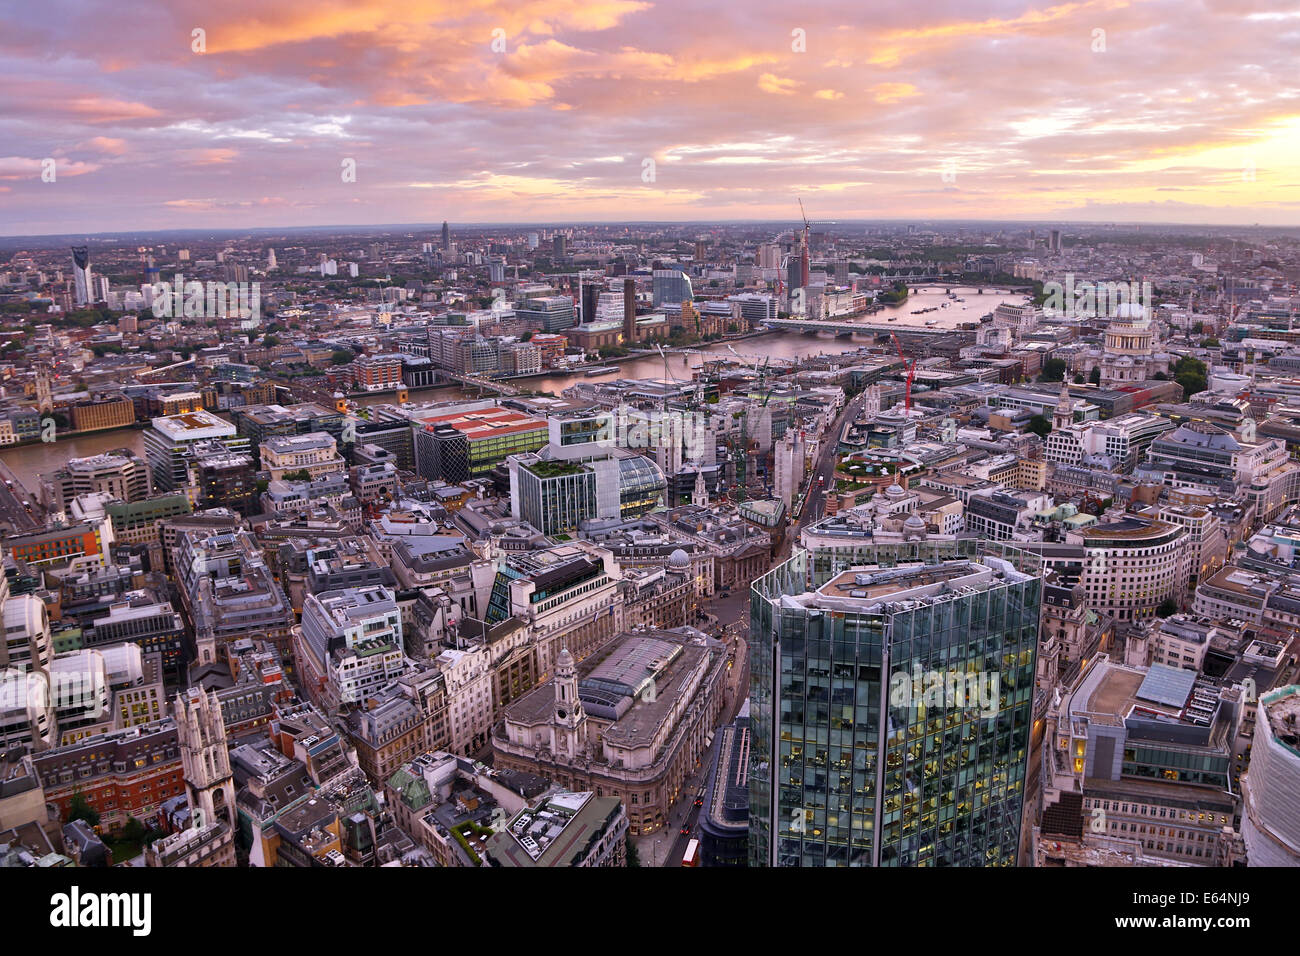 General view of buildings of the city skyline at dusk in London, England Stock Photo